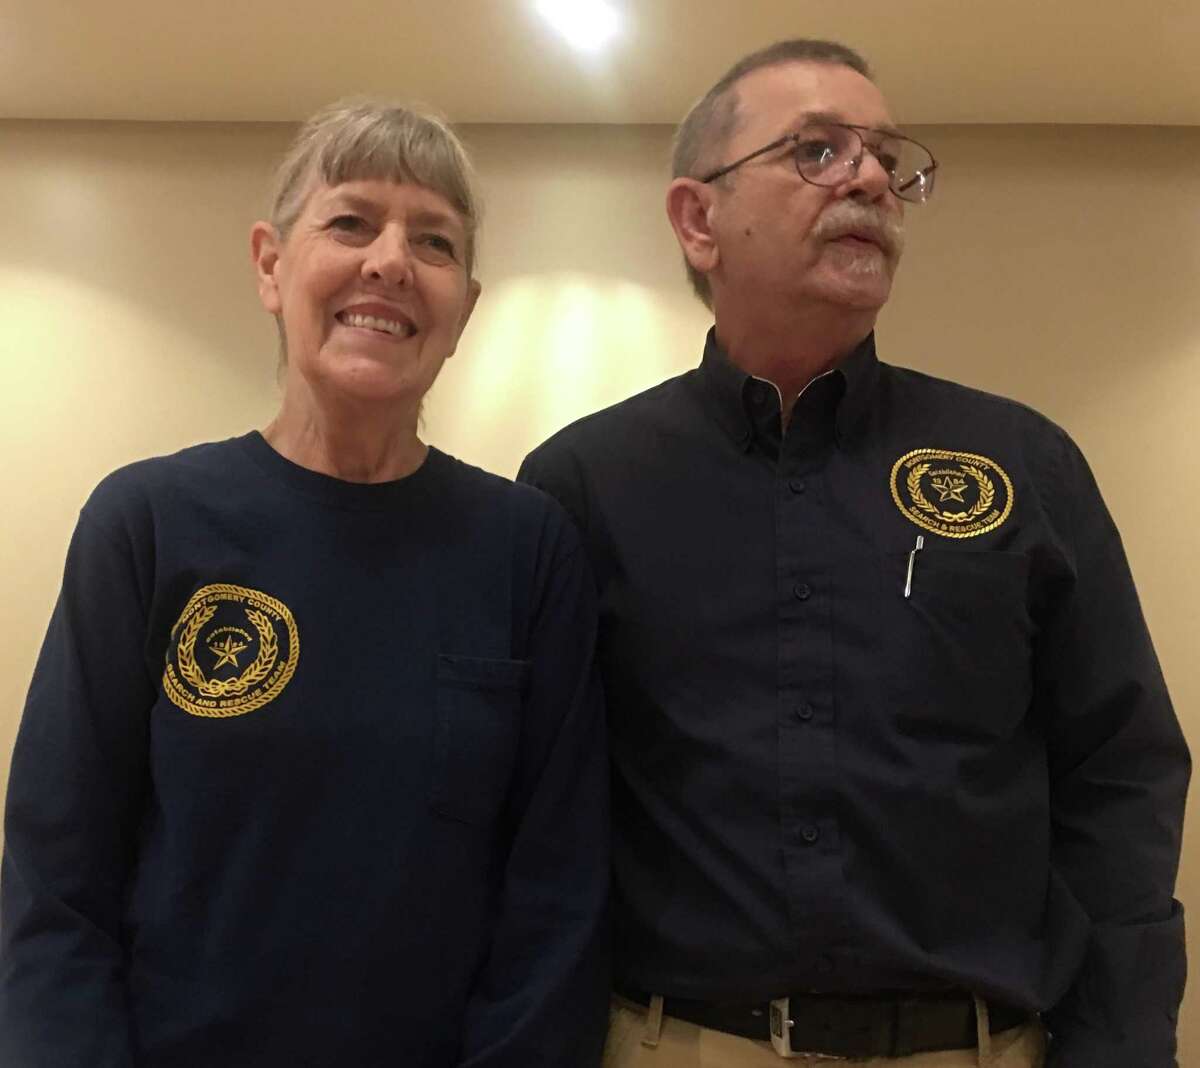 Lake conroe centennial lions club welcomed Gerrie and Bill Singleton of Montgomery county search and rescue at their last regular meeting at Walden yacht club.